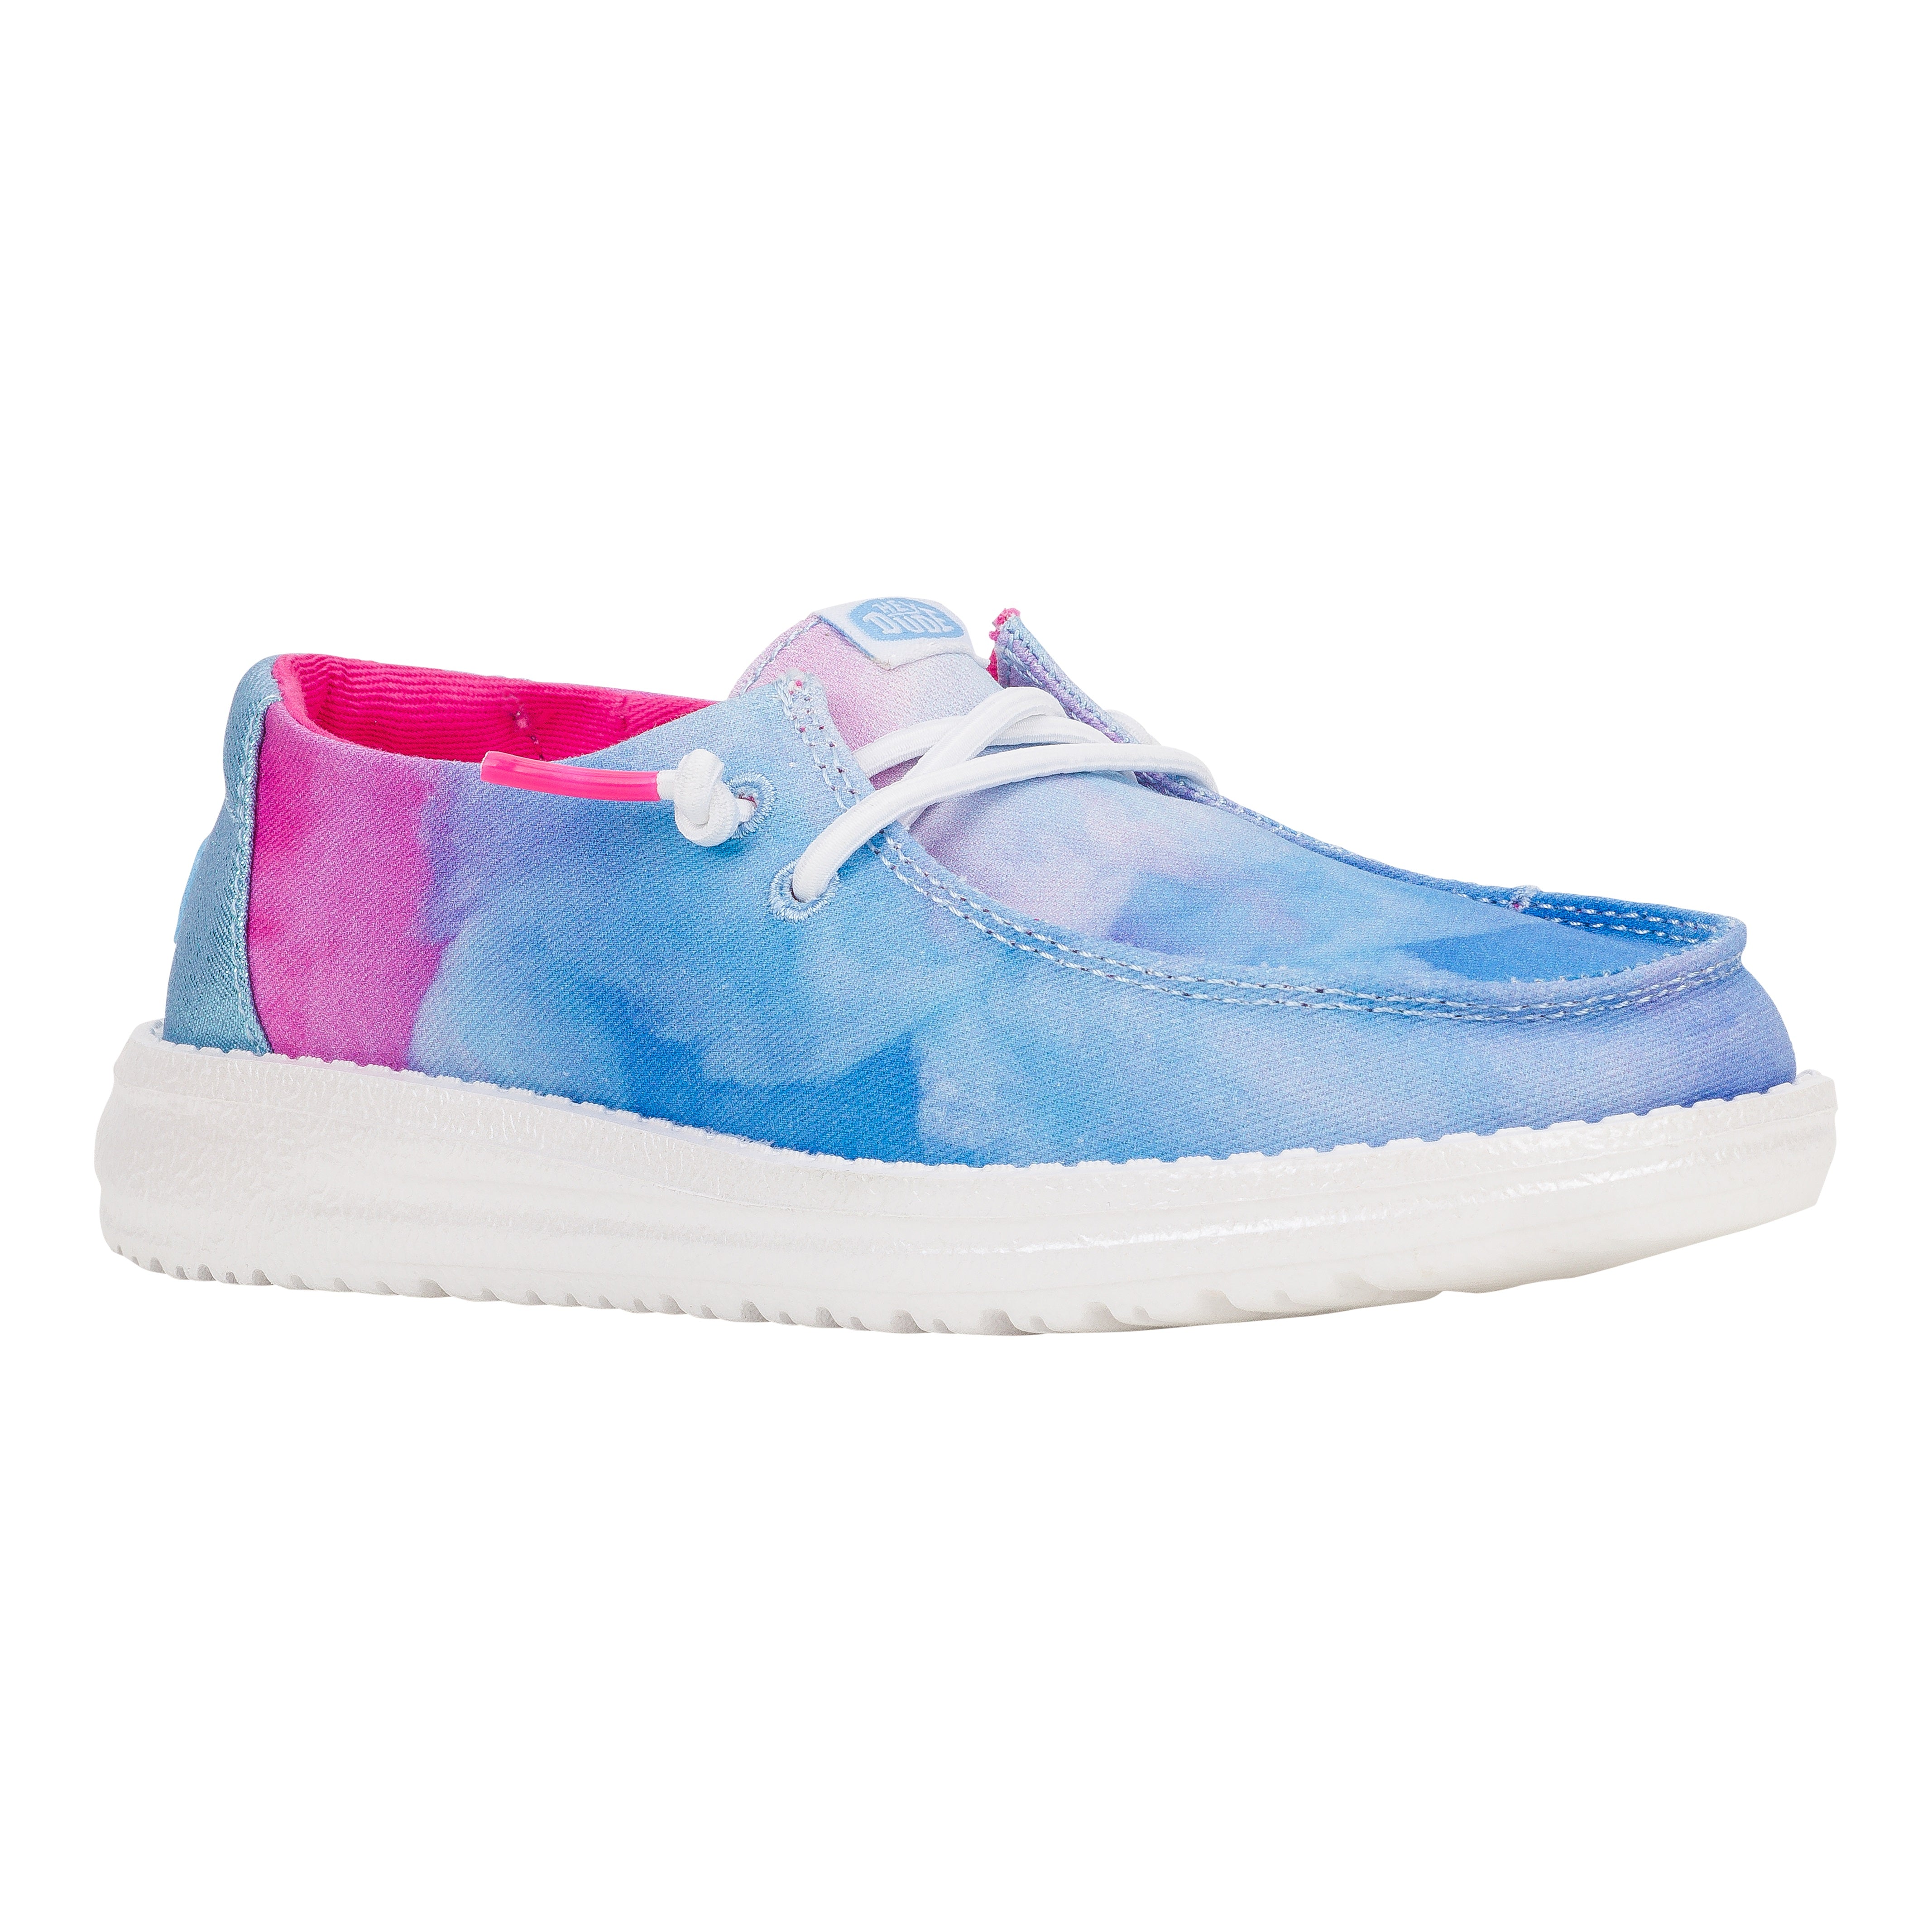 Wendy Youth Cotton Candy Sky Blue - Girls' Shoes | HEYDUDE shoes